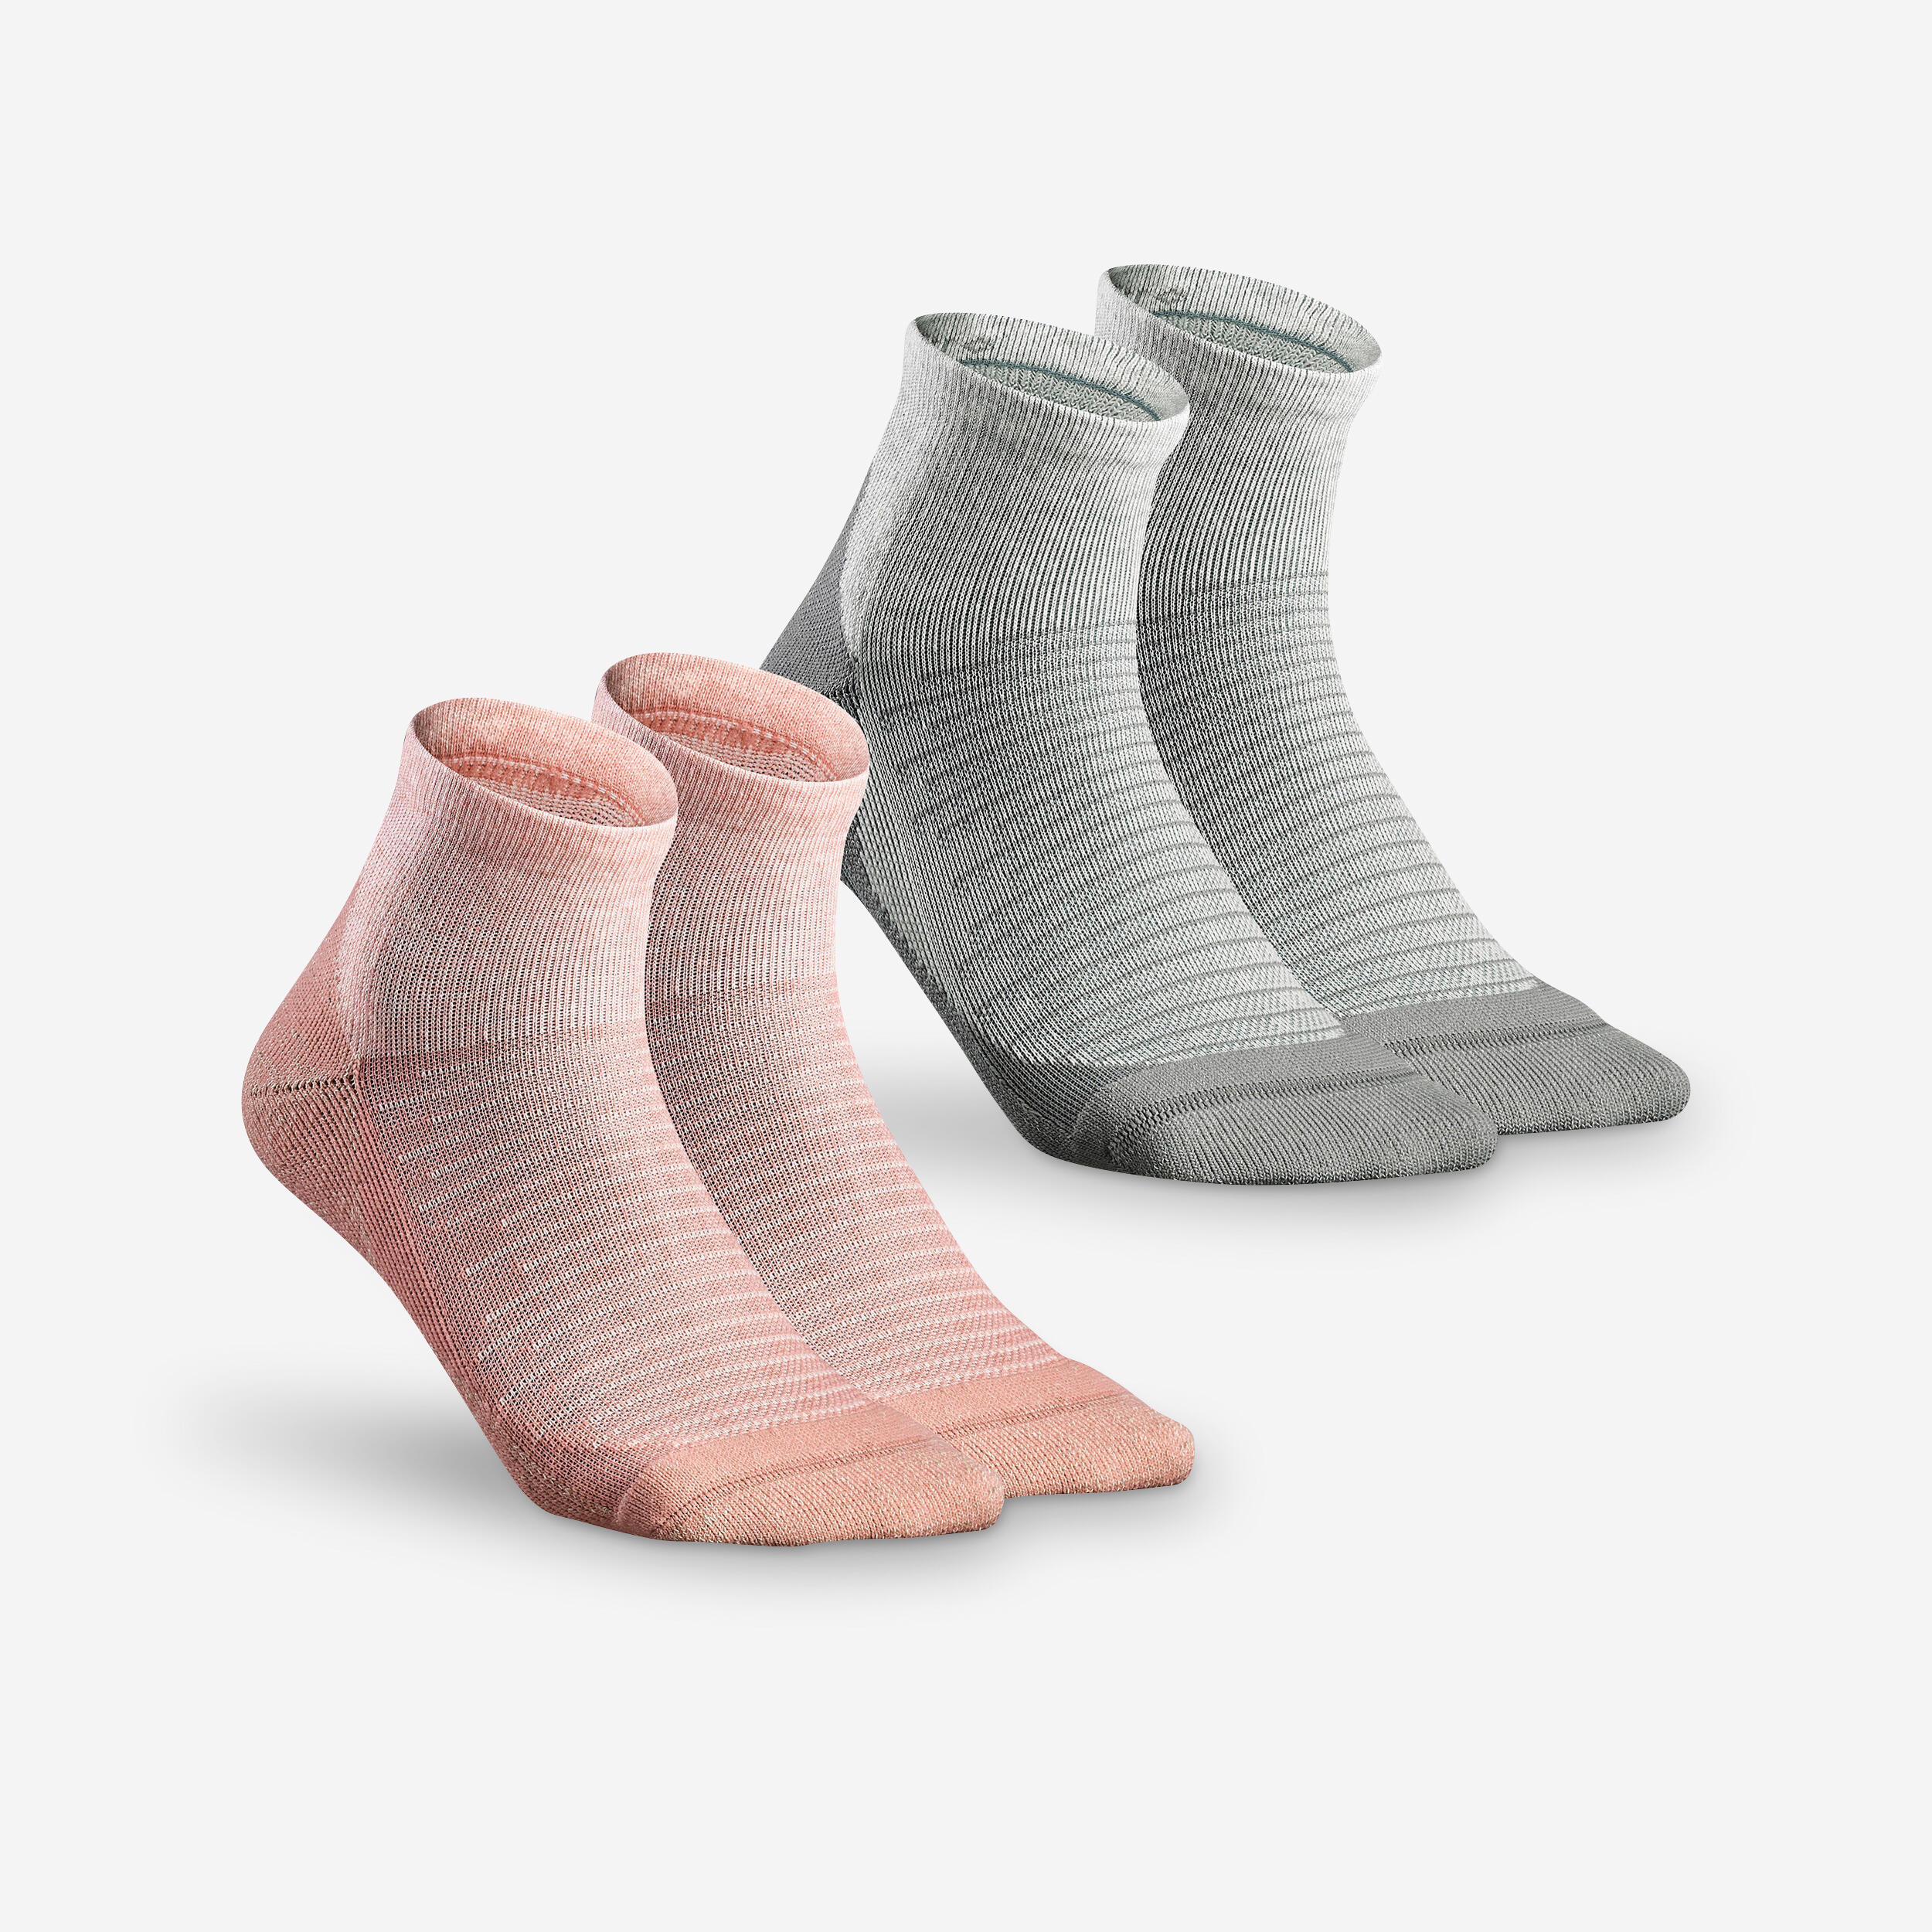 Hike 100 Mid Socks - Pink and Grey- Pack of 2 1/9